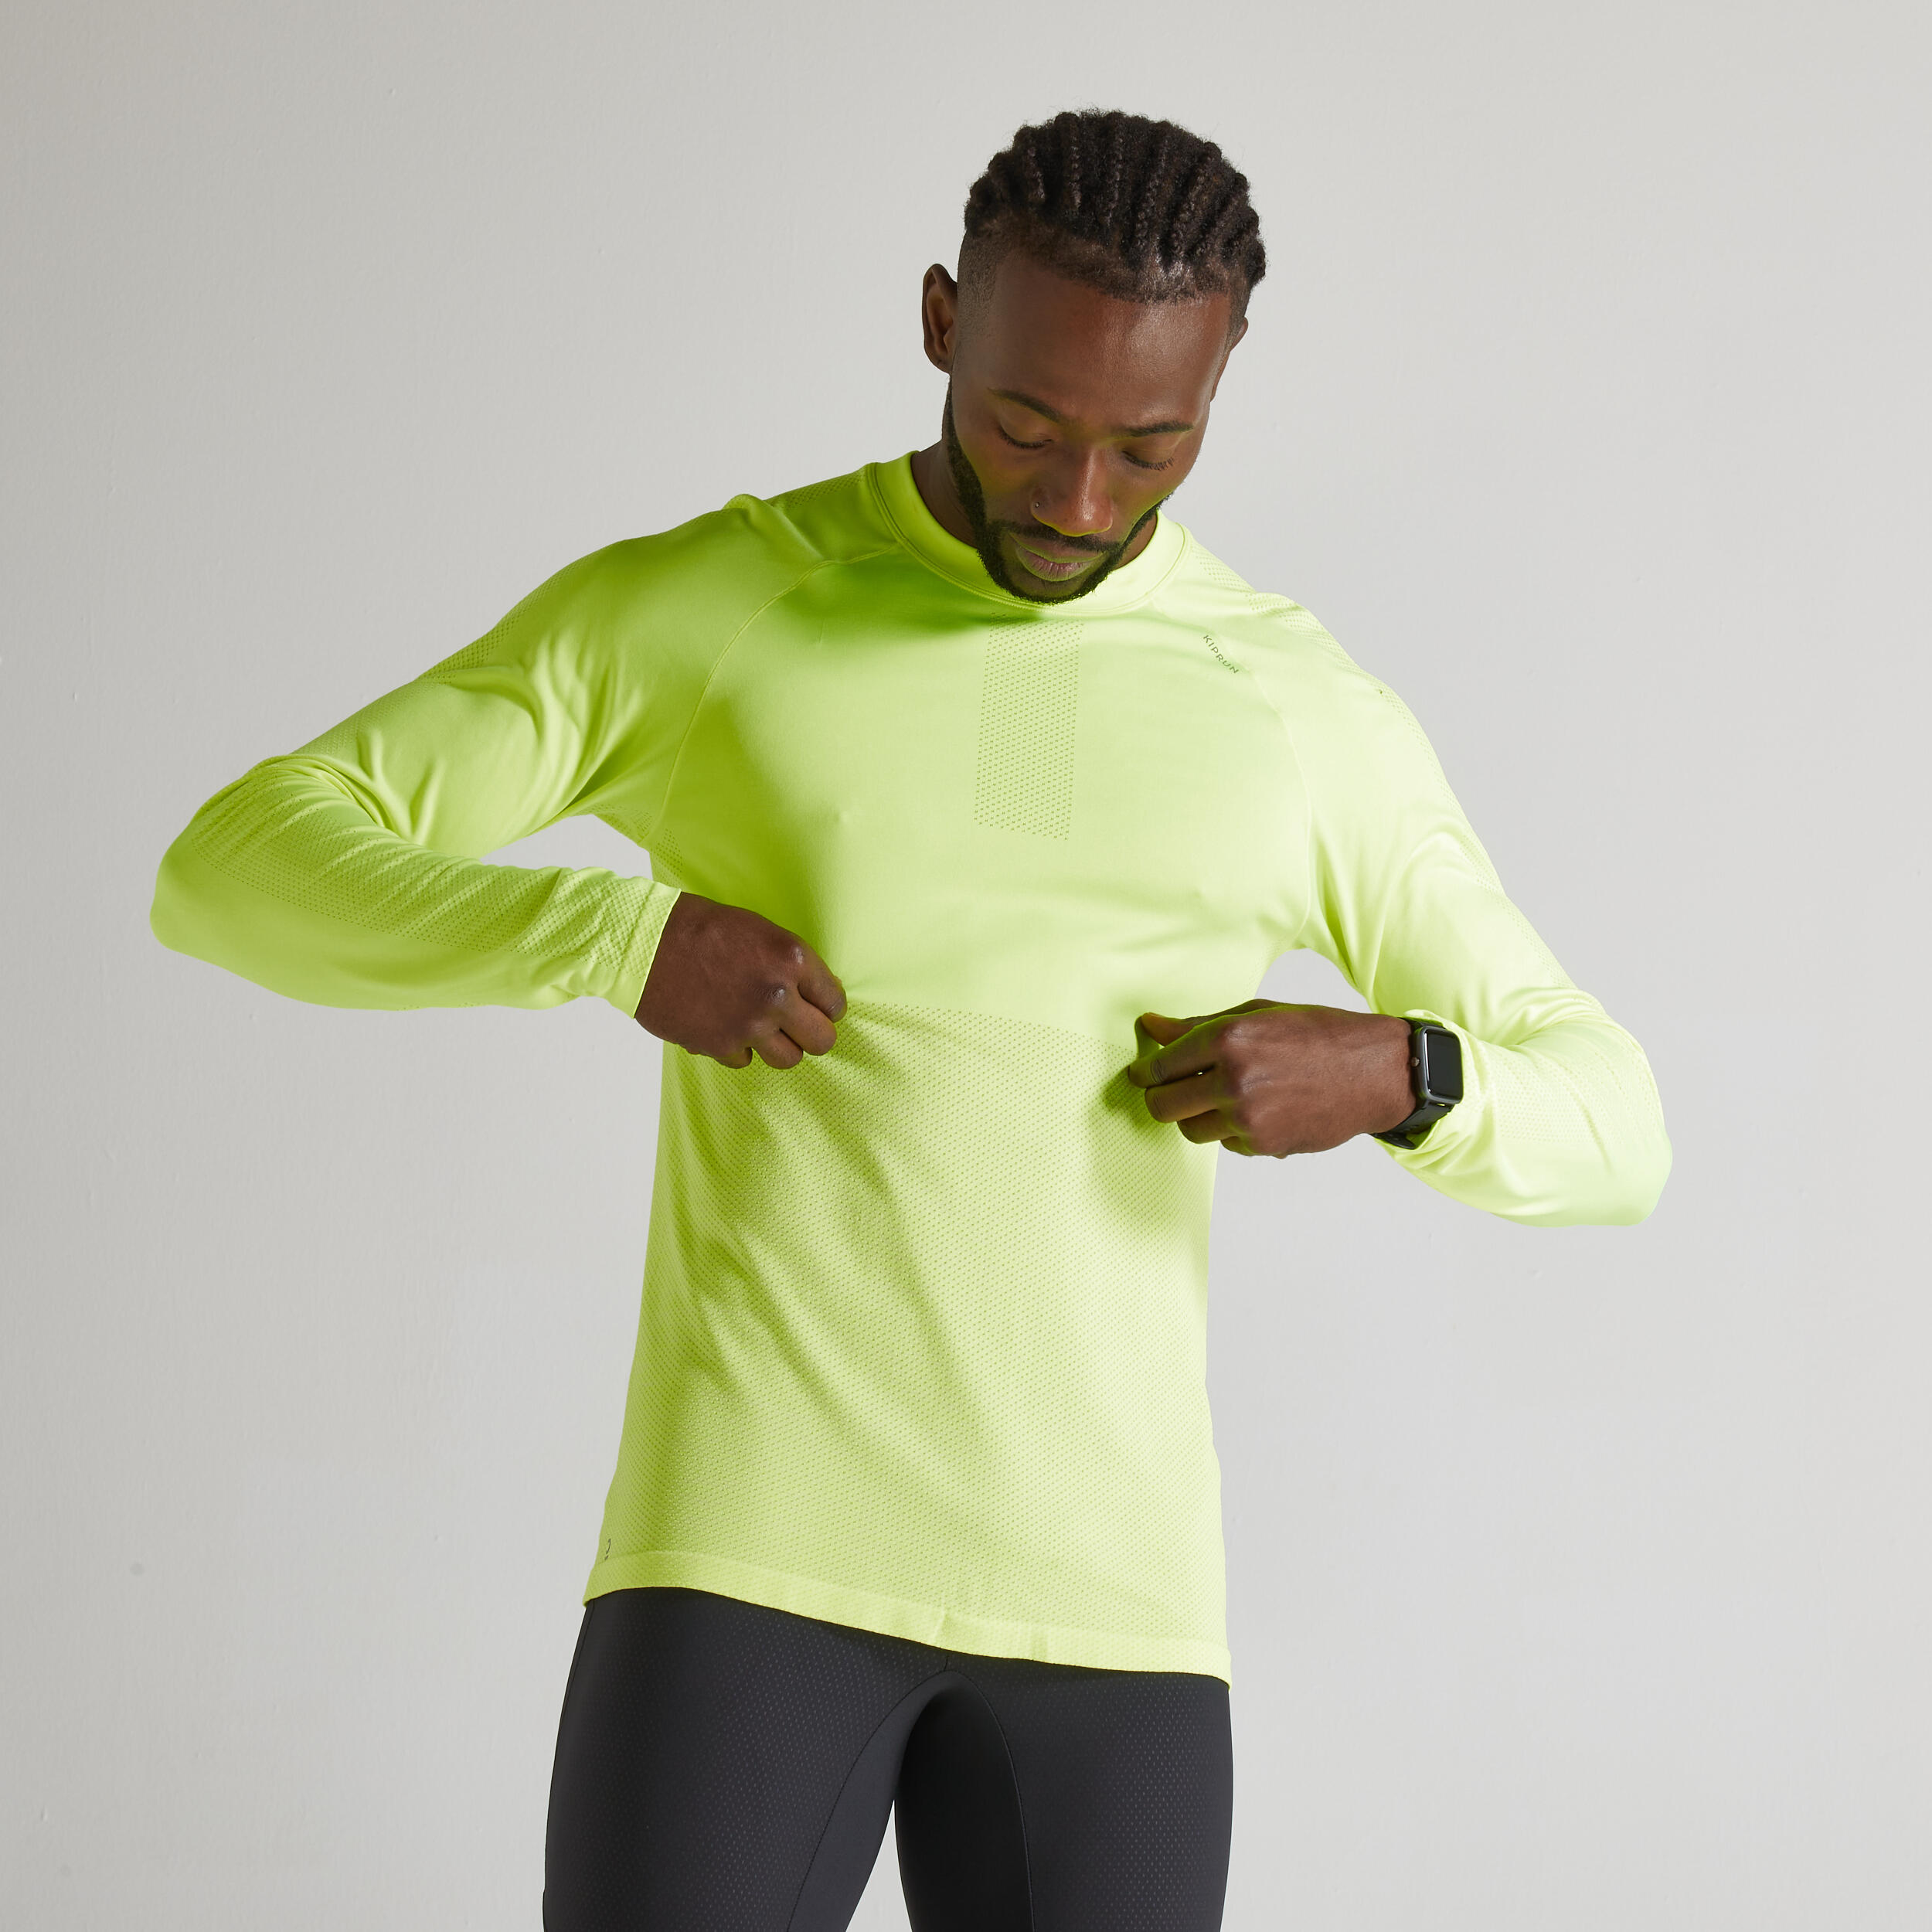 CARE MEN'S BREATHABLE LONG-SLEEVED RUNNING T-SHIRT - YELLOW 8/9